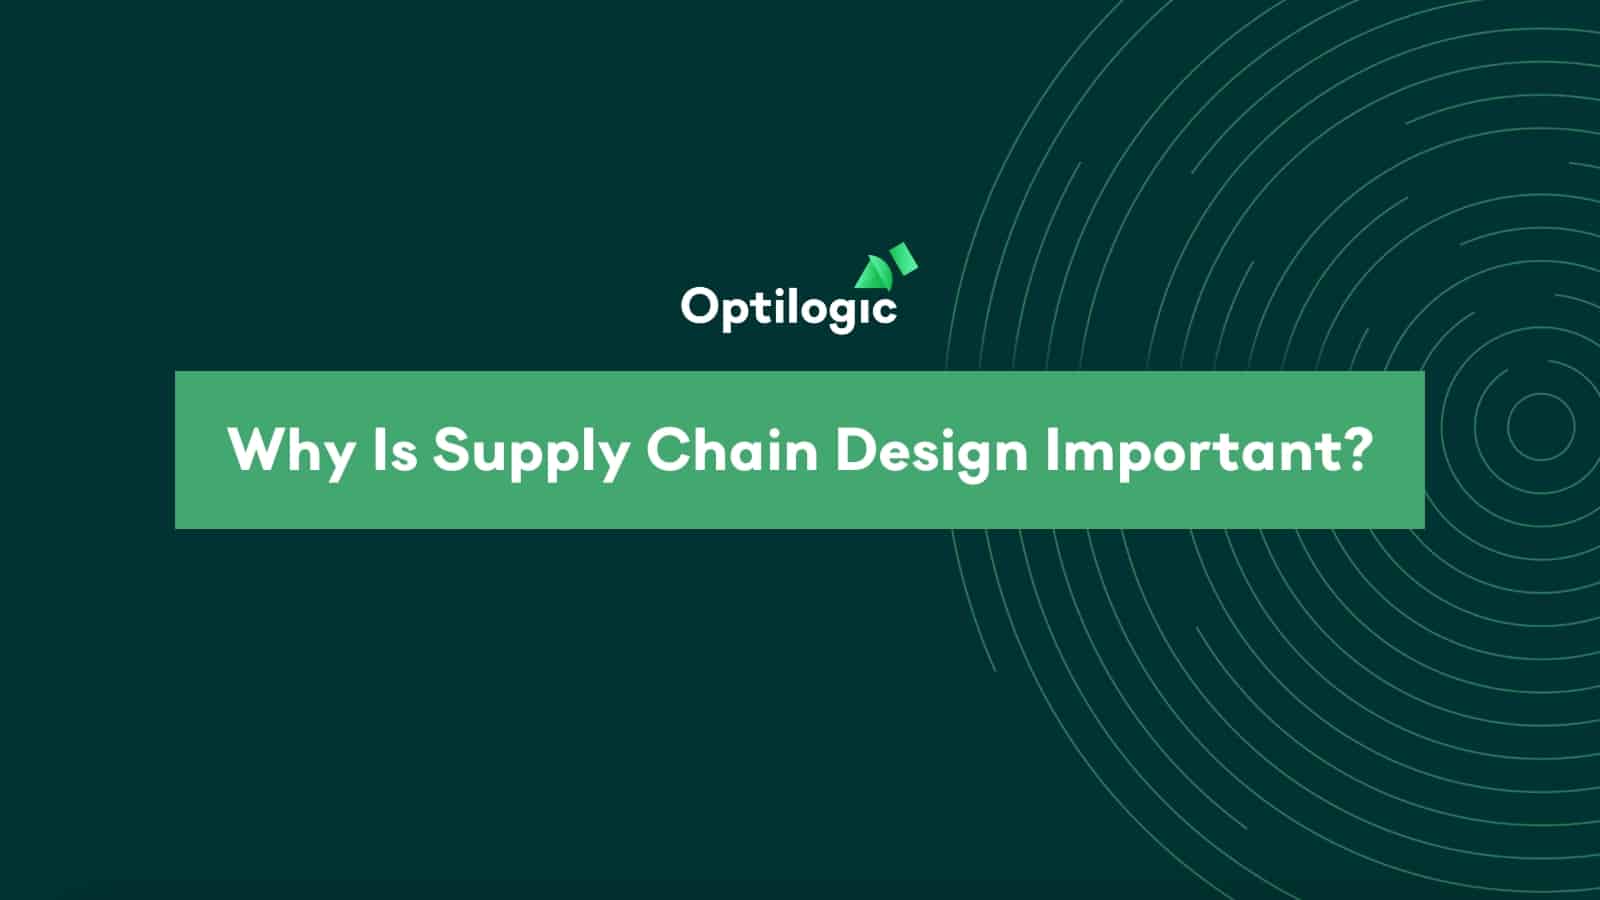 Why Is Supply Chain Design Important